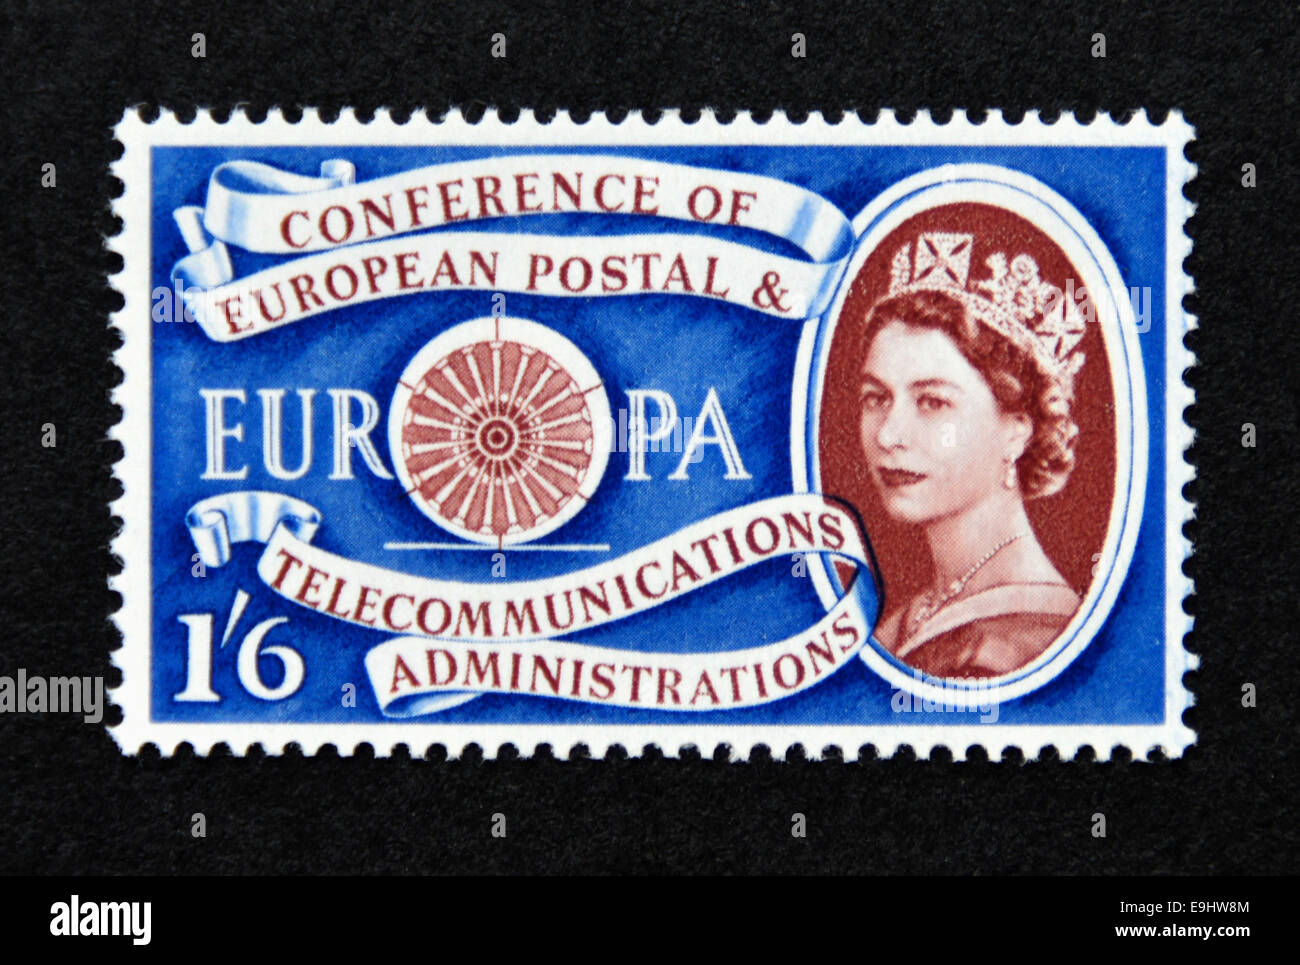 Postage stamp. Great Britain. Queen Elizabeth II. Europa, First  Anniversary. European Postal and Telecommunications Conference Stock Photo  - Alamy